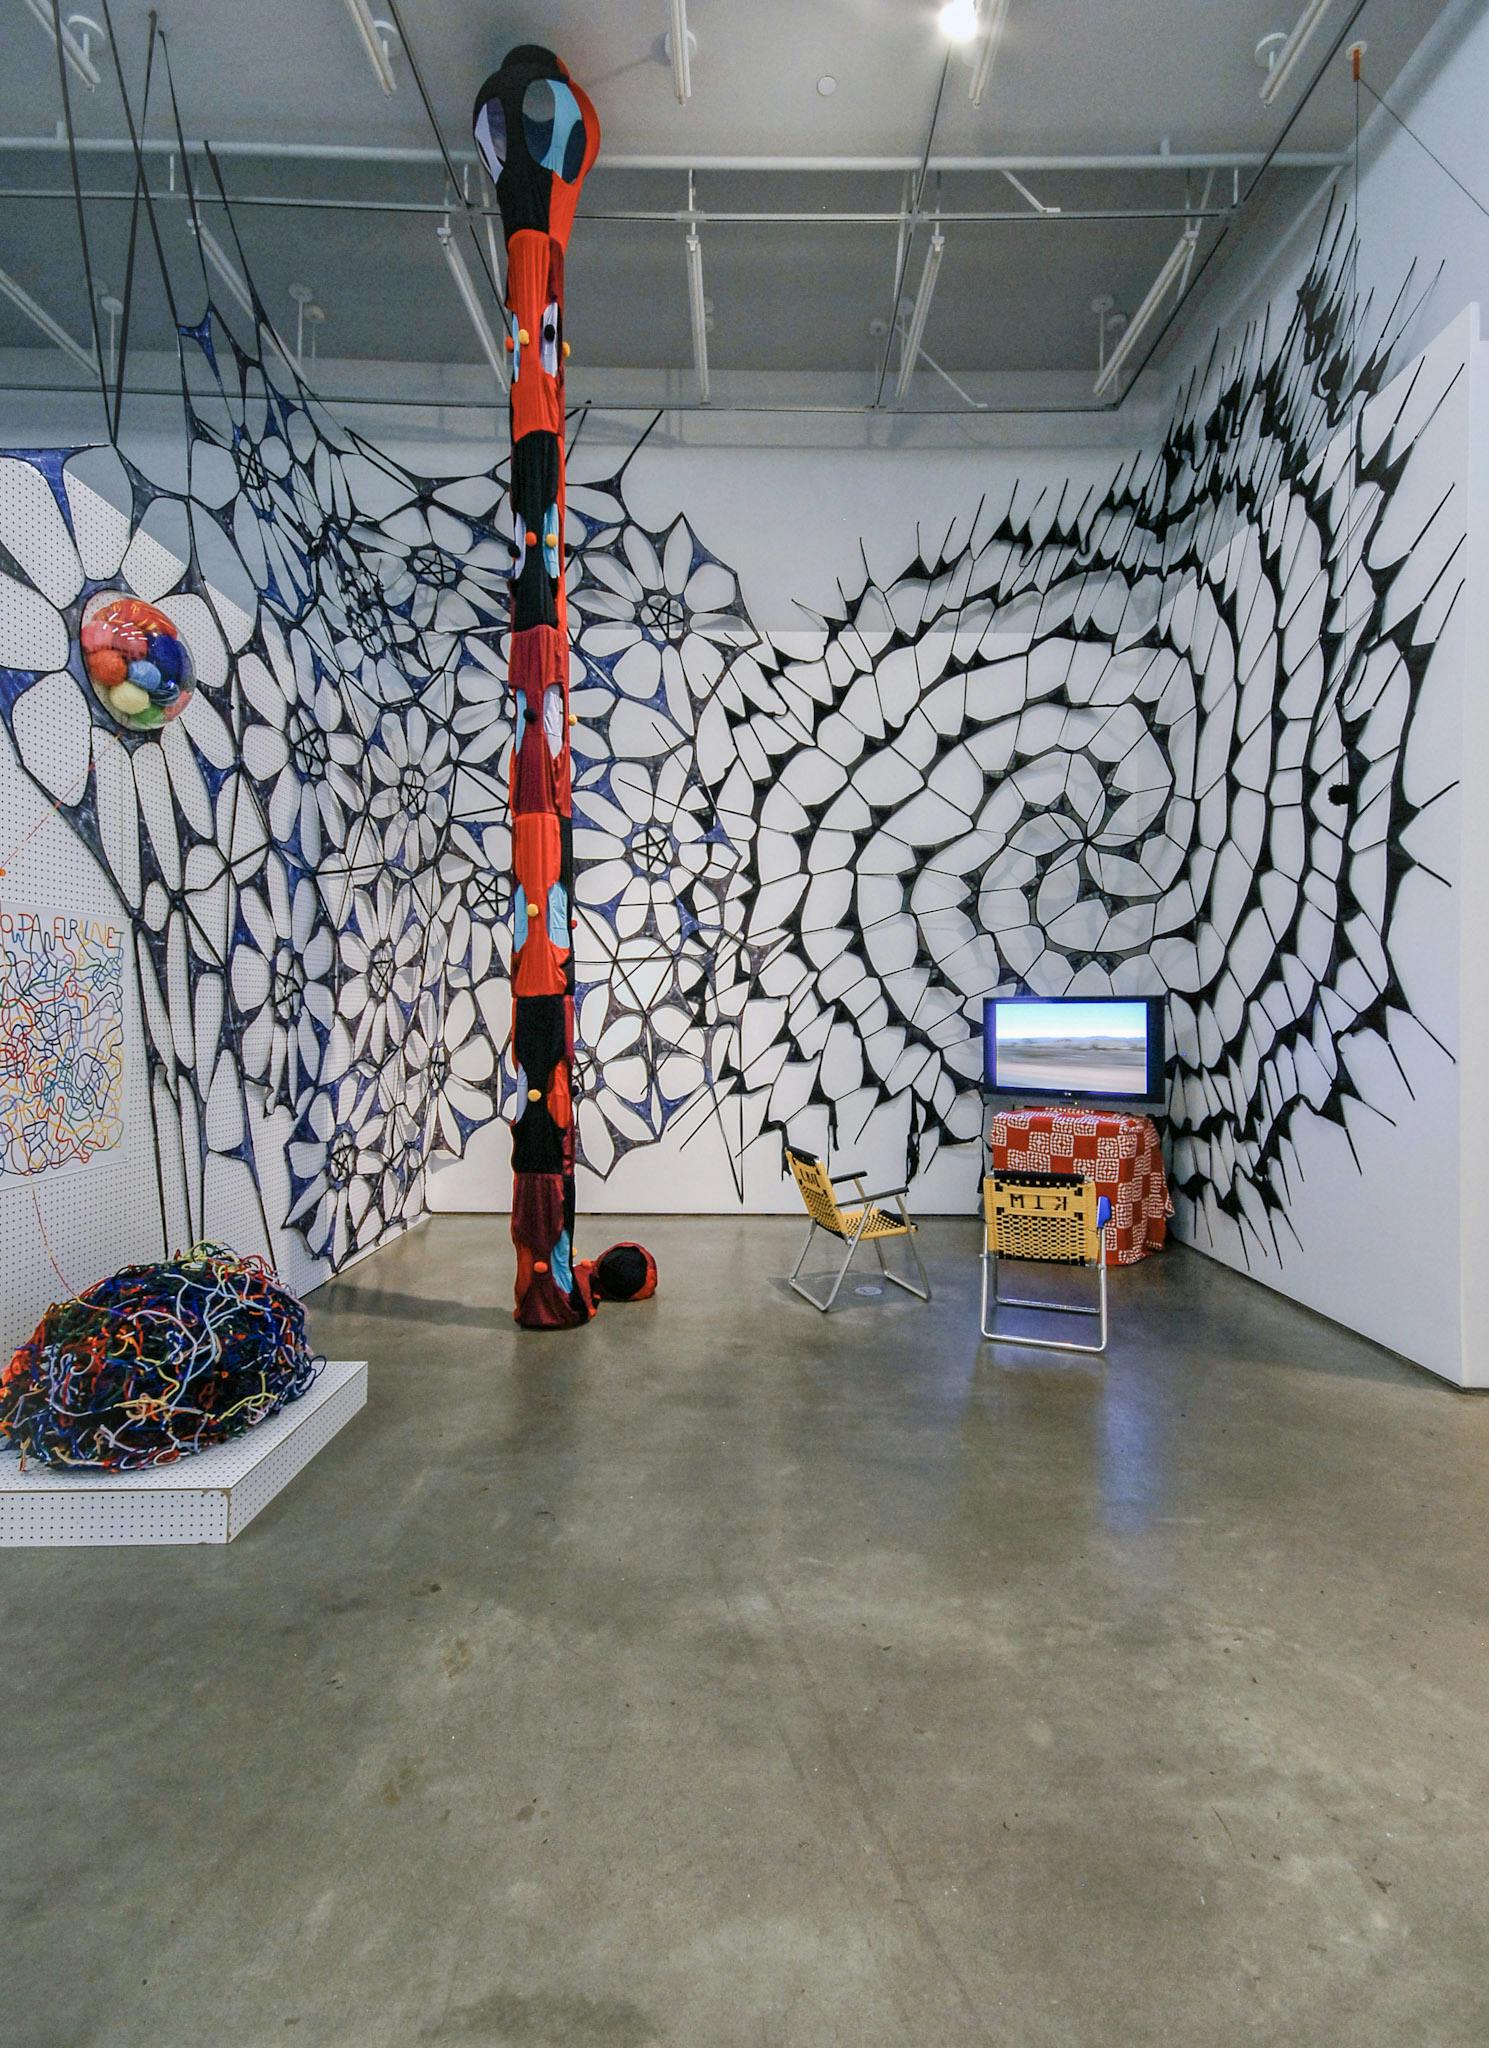 Various sculptures are installed in a gallery space. Large black web-shaped sculptures cover the gallery walls behind a TV monitor. A red tube-shaped sculpture is hanging from the ceiling.   